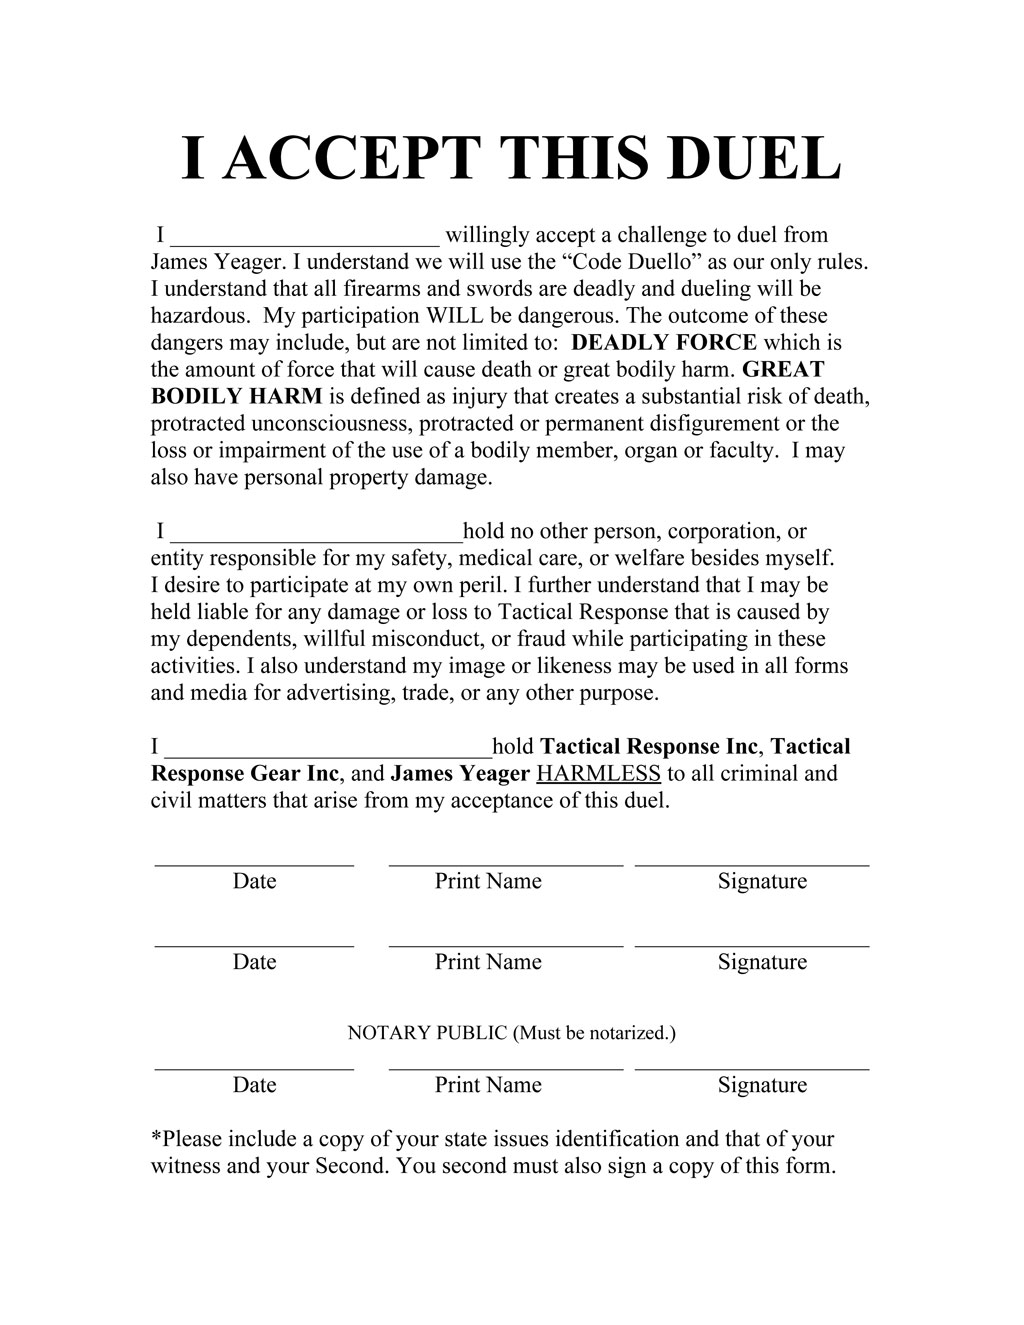 James-Yeager-Duel-Murder-Contract-Tactical-Response.jpg